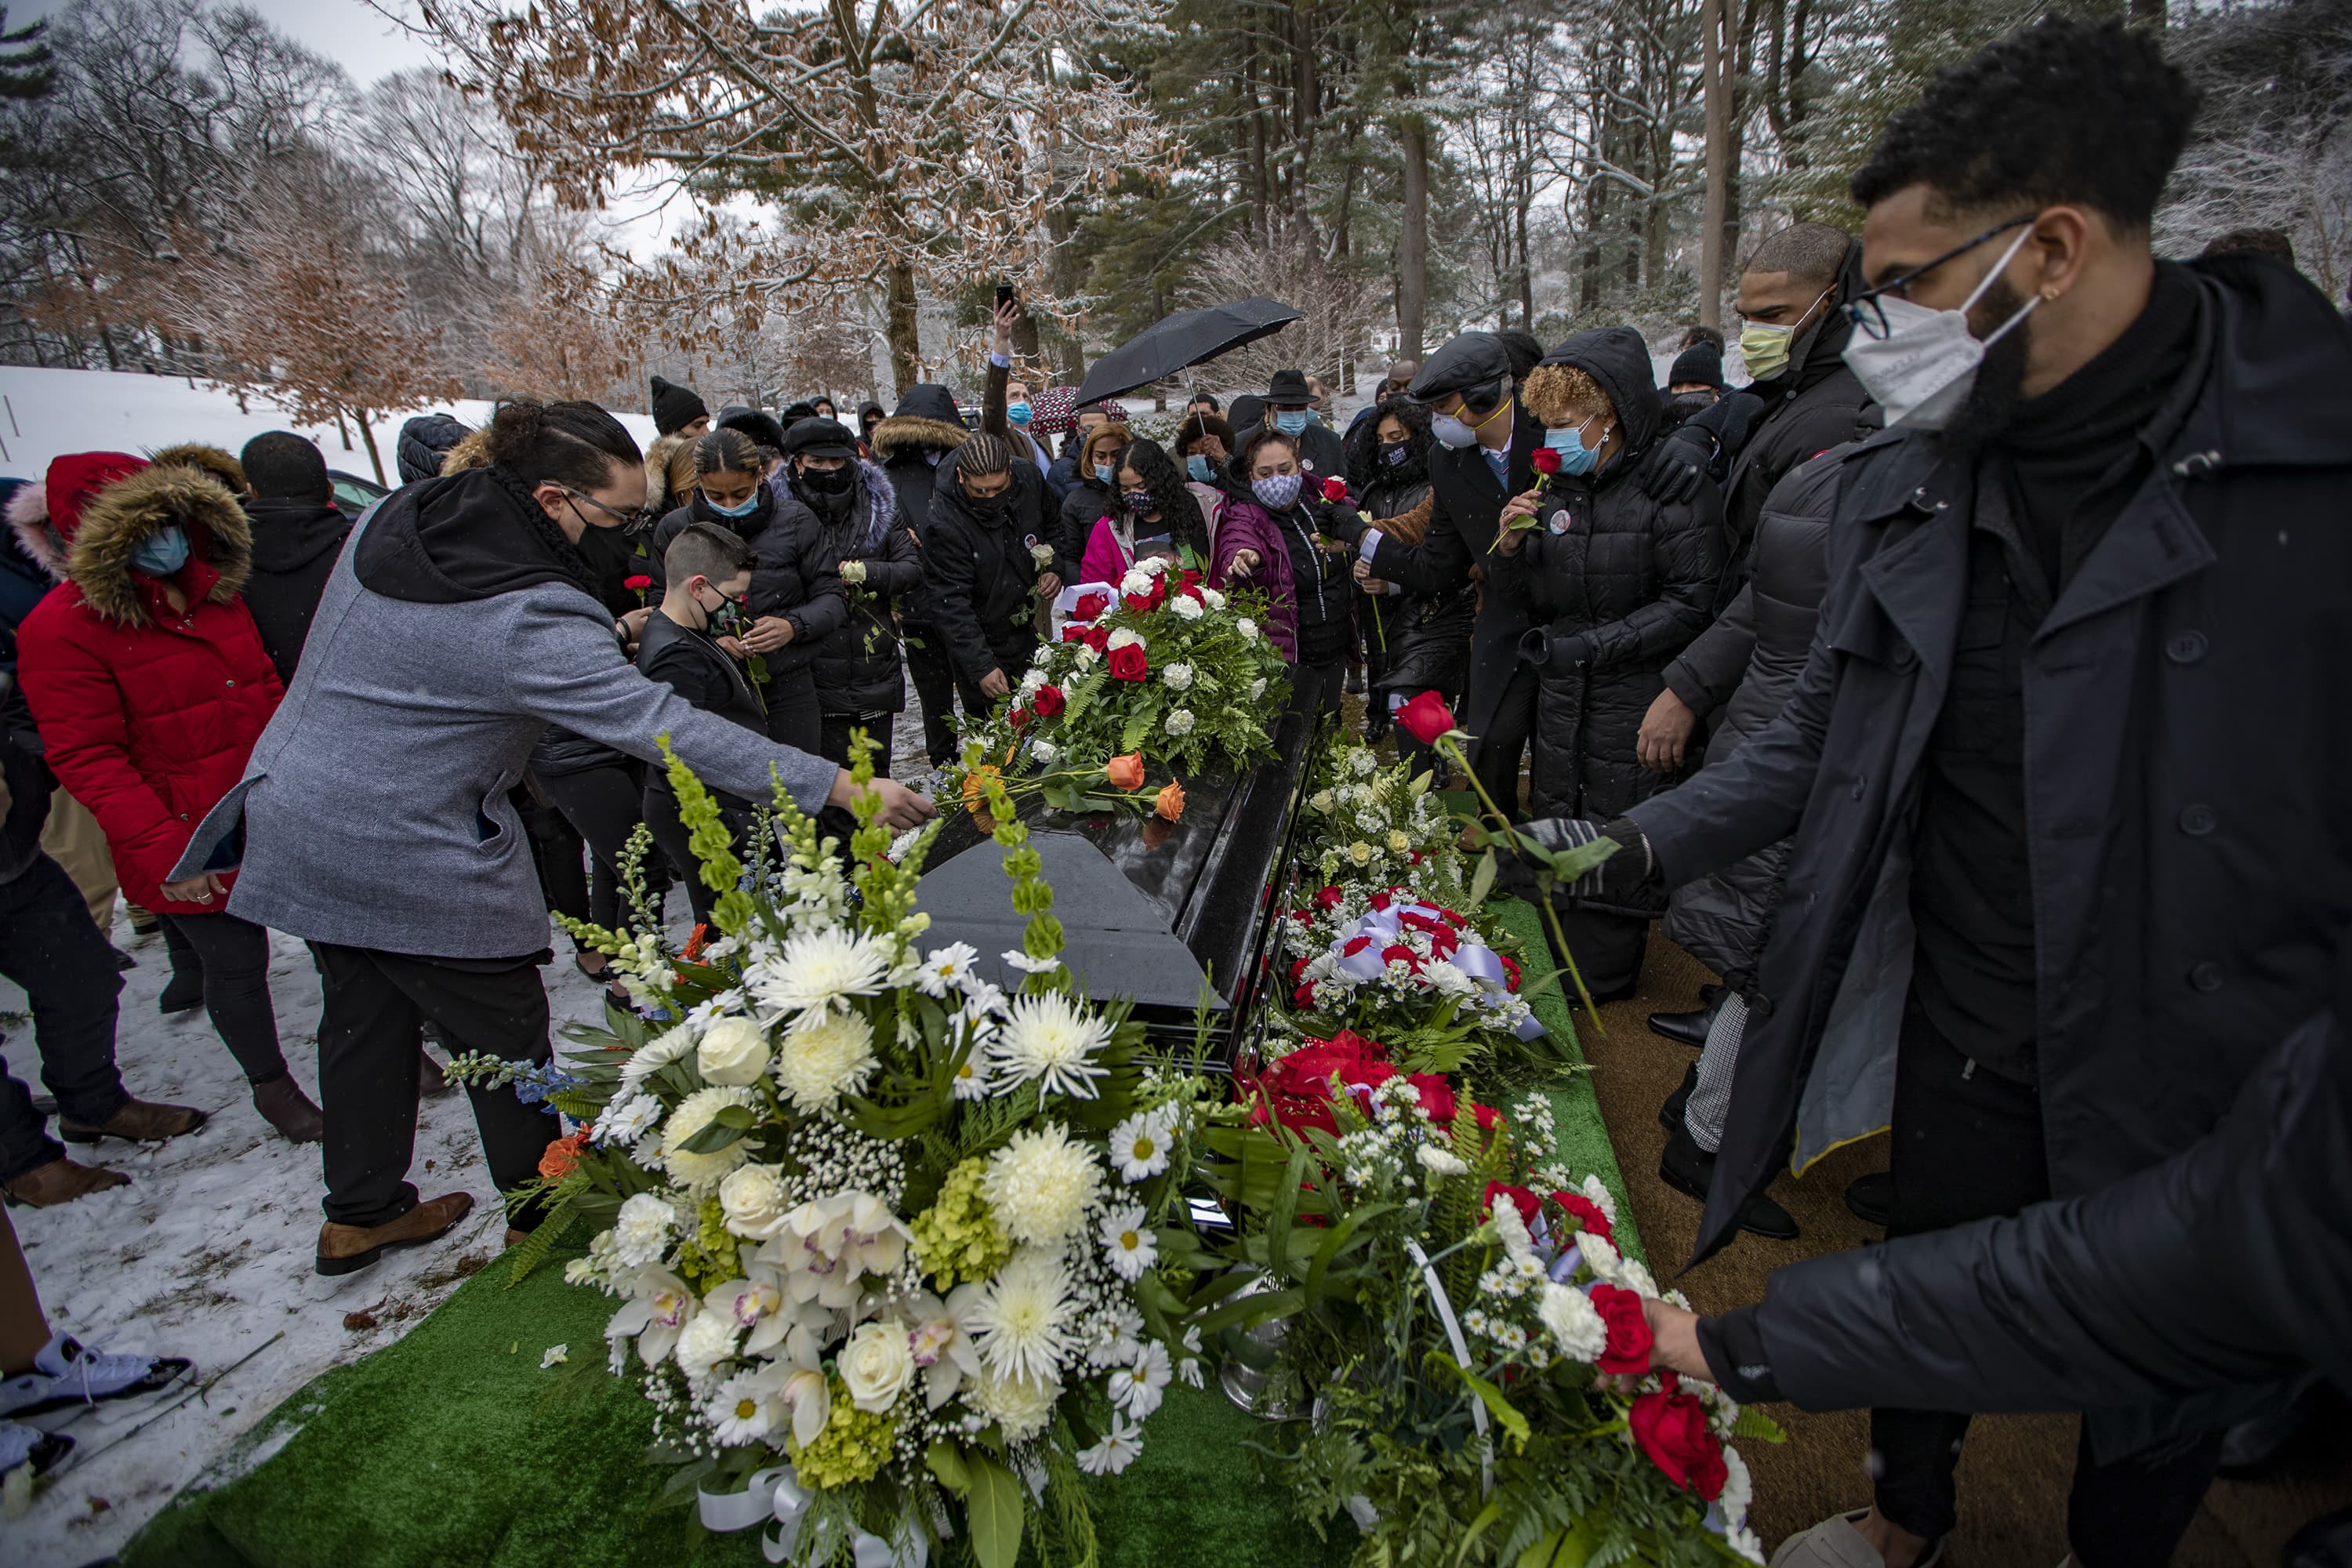 Friends and family place flowers on top of Henry Tapia's casket at Forest Hills Cemetery. (Jesse Costa/WBUR)